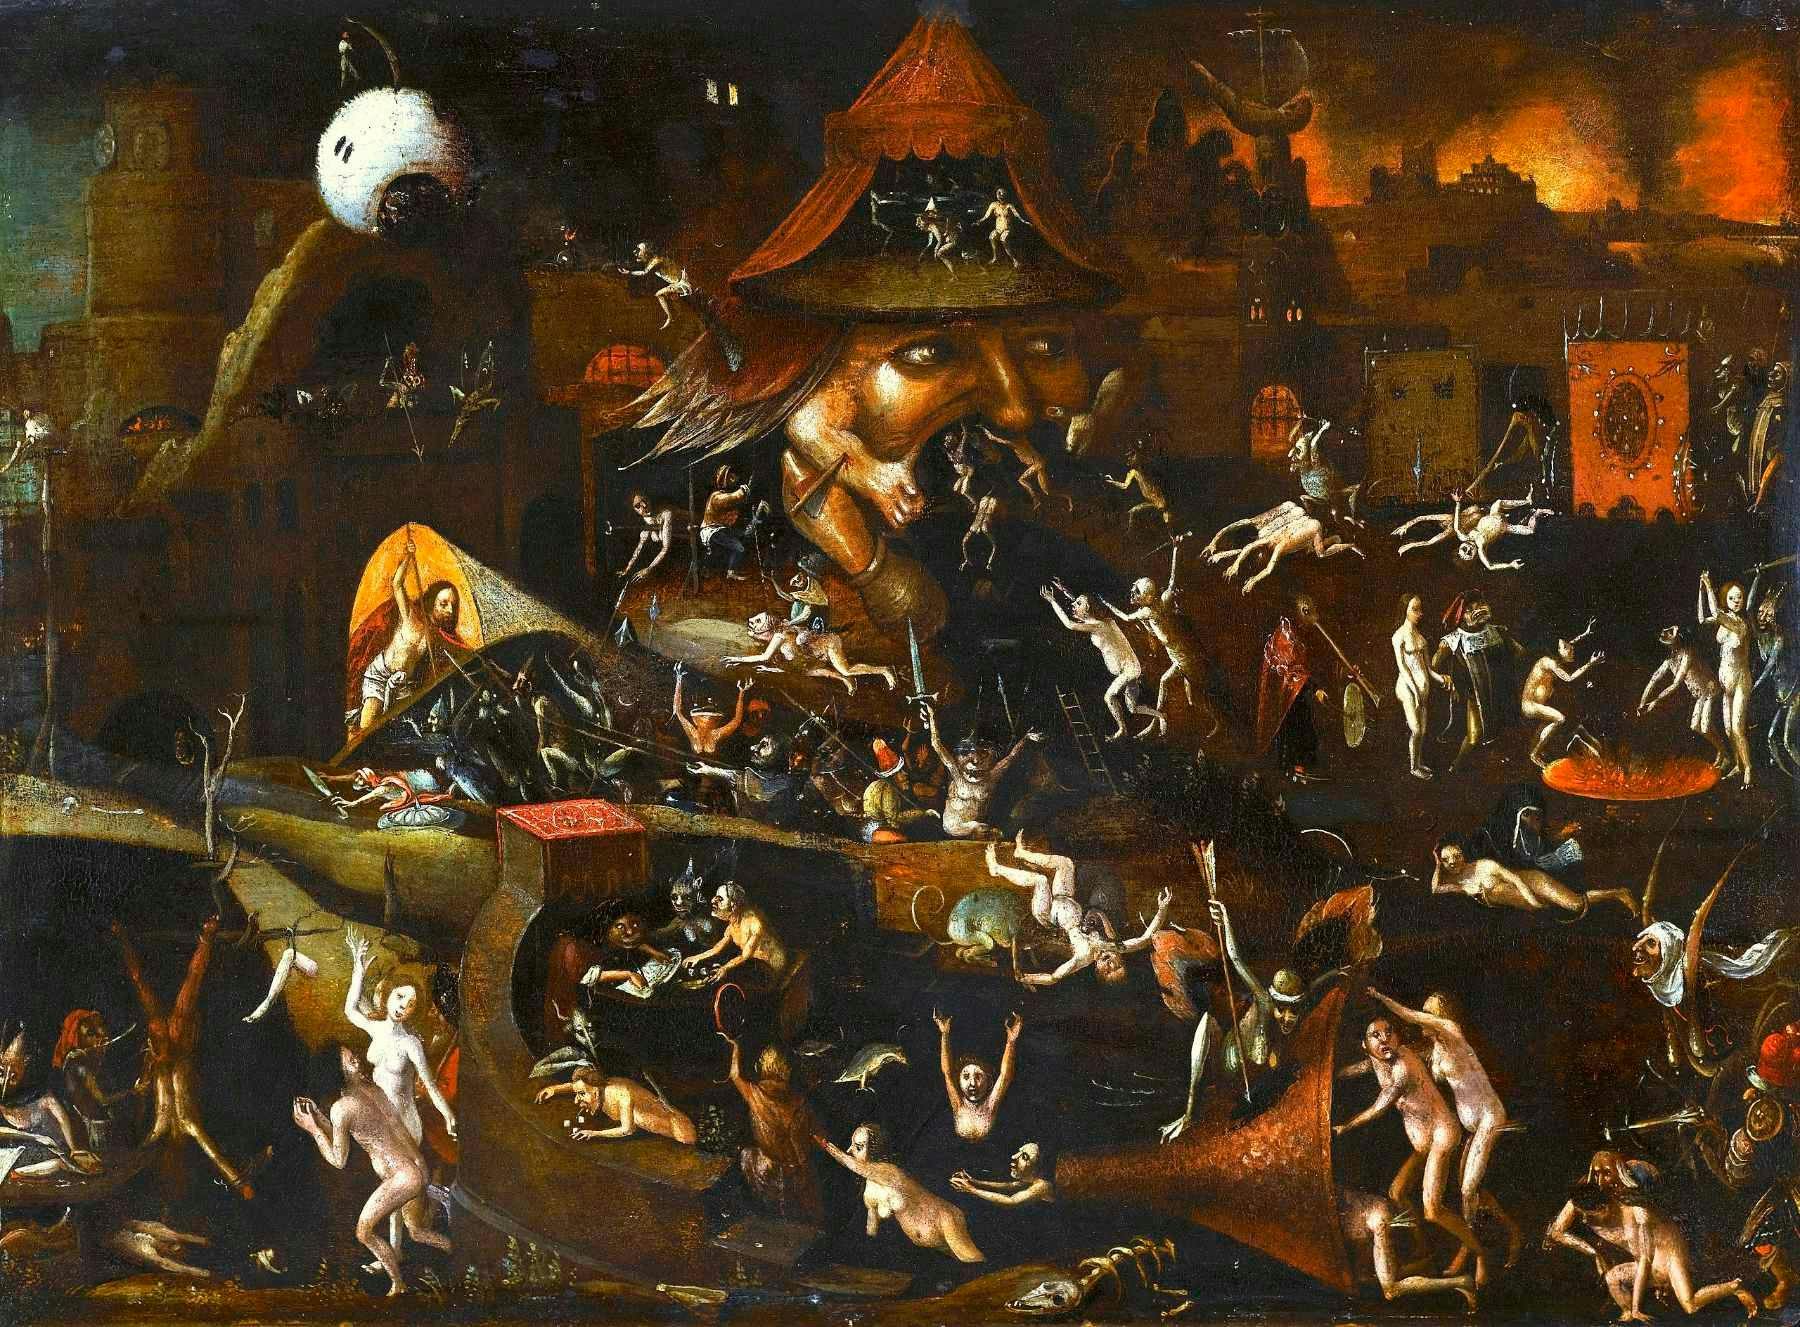 Follower of Hieronymus Bosch The Harrowing of Hell